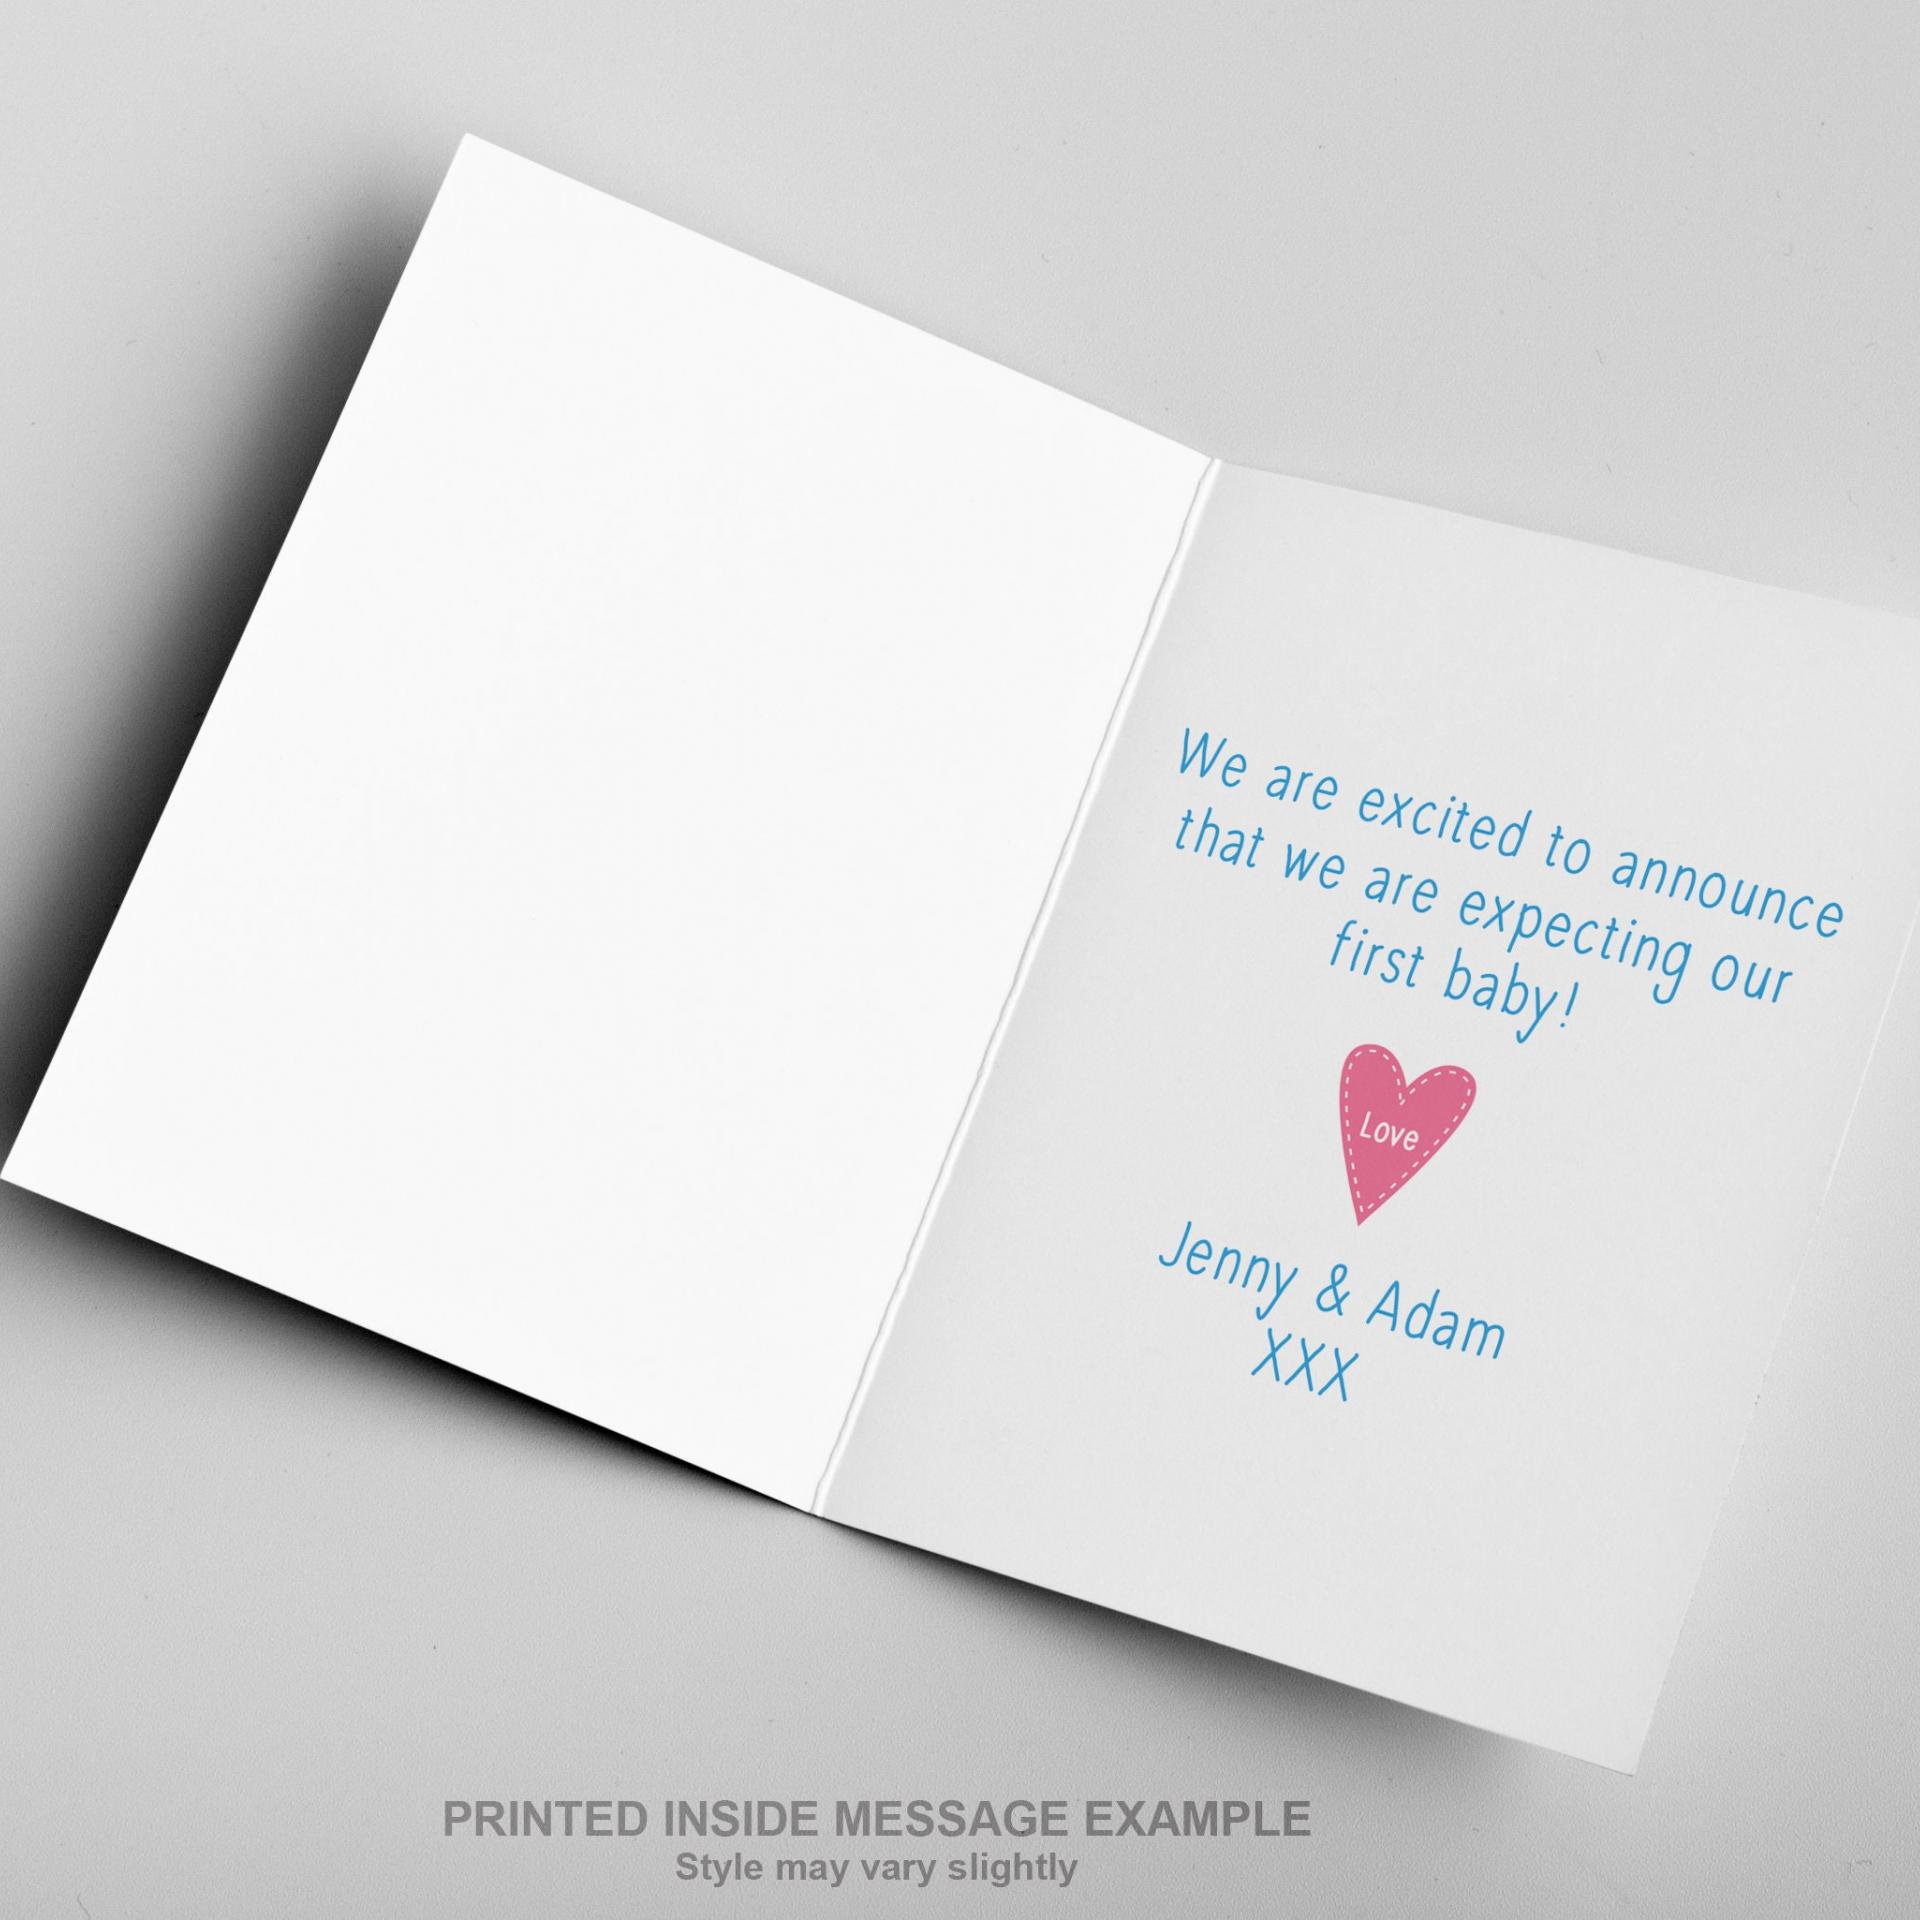 New Baby Card, You're going to be an Auntie Card - Aunt Card, Expecting Card, Pregnancy Announce, Pregnancy Reveal, Pregnant, Auntie Gifts